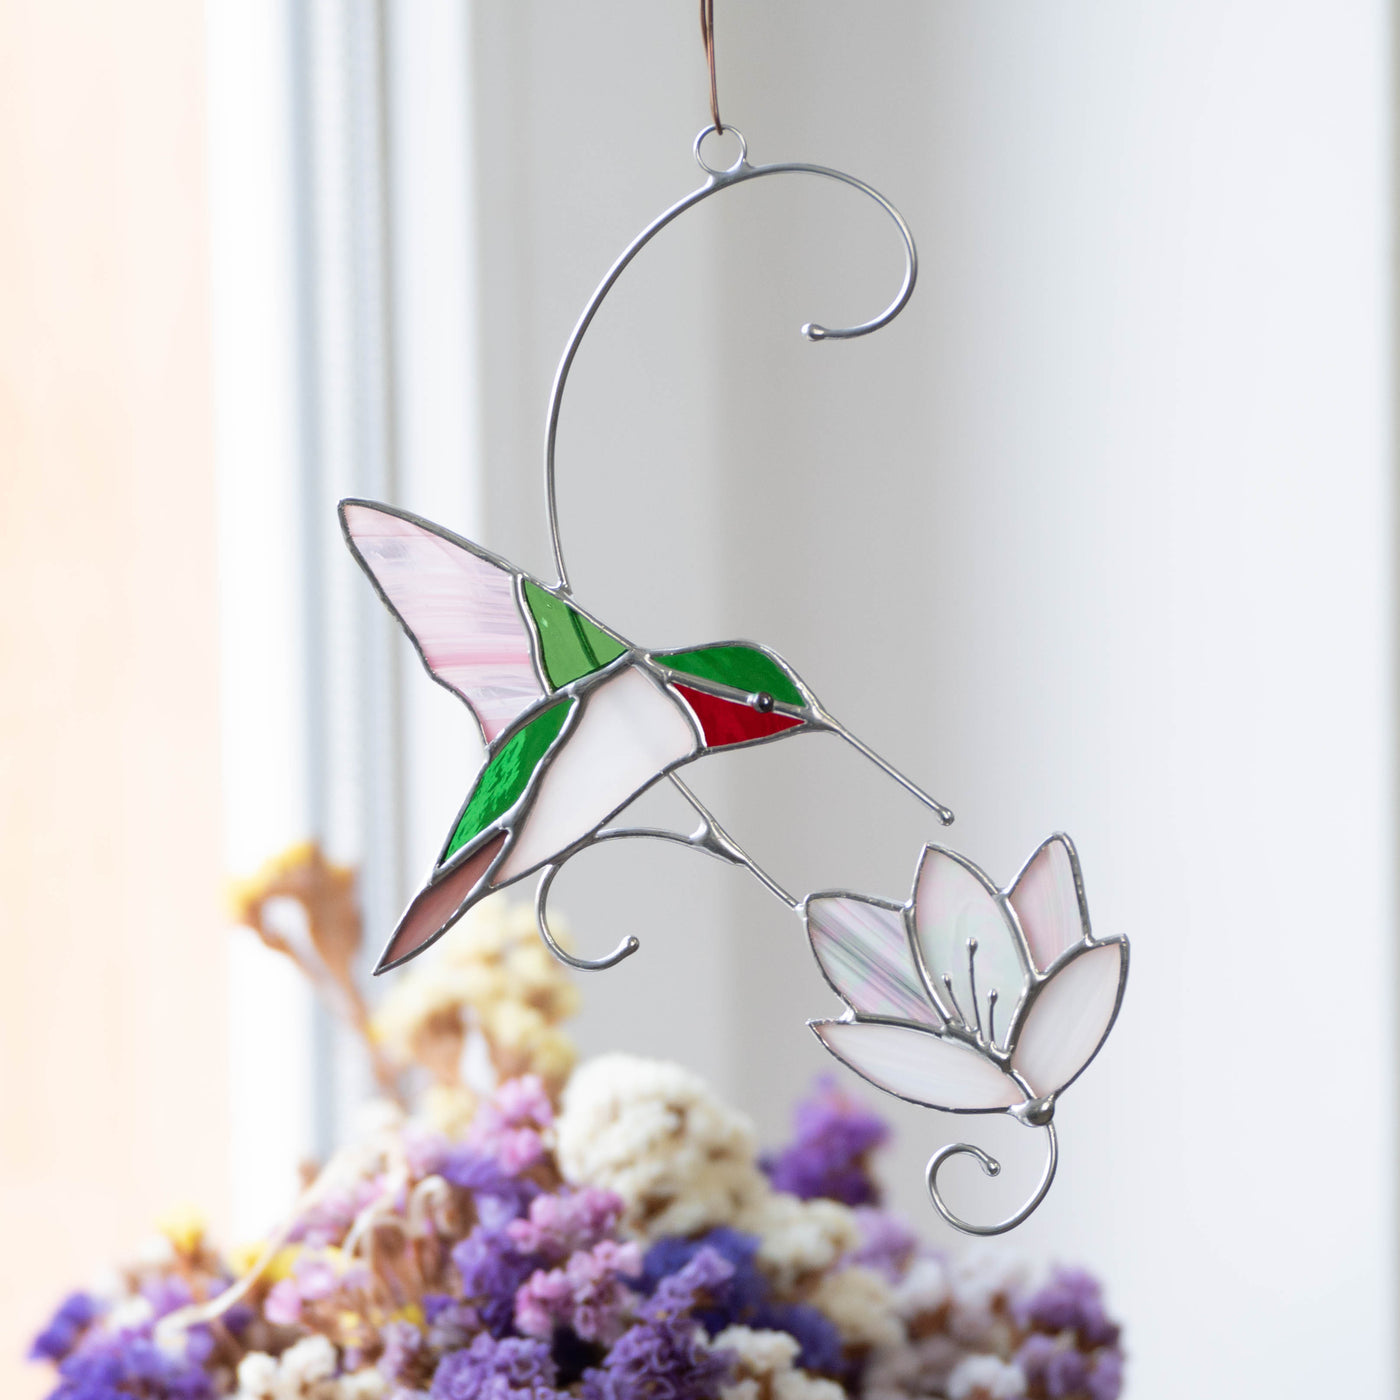 Stained glass ruby-throated hummingbird window hanging